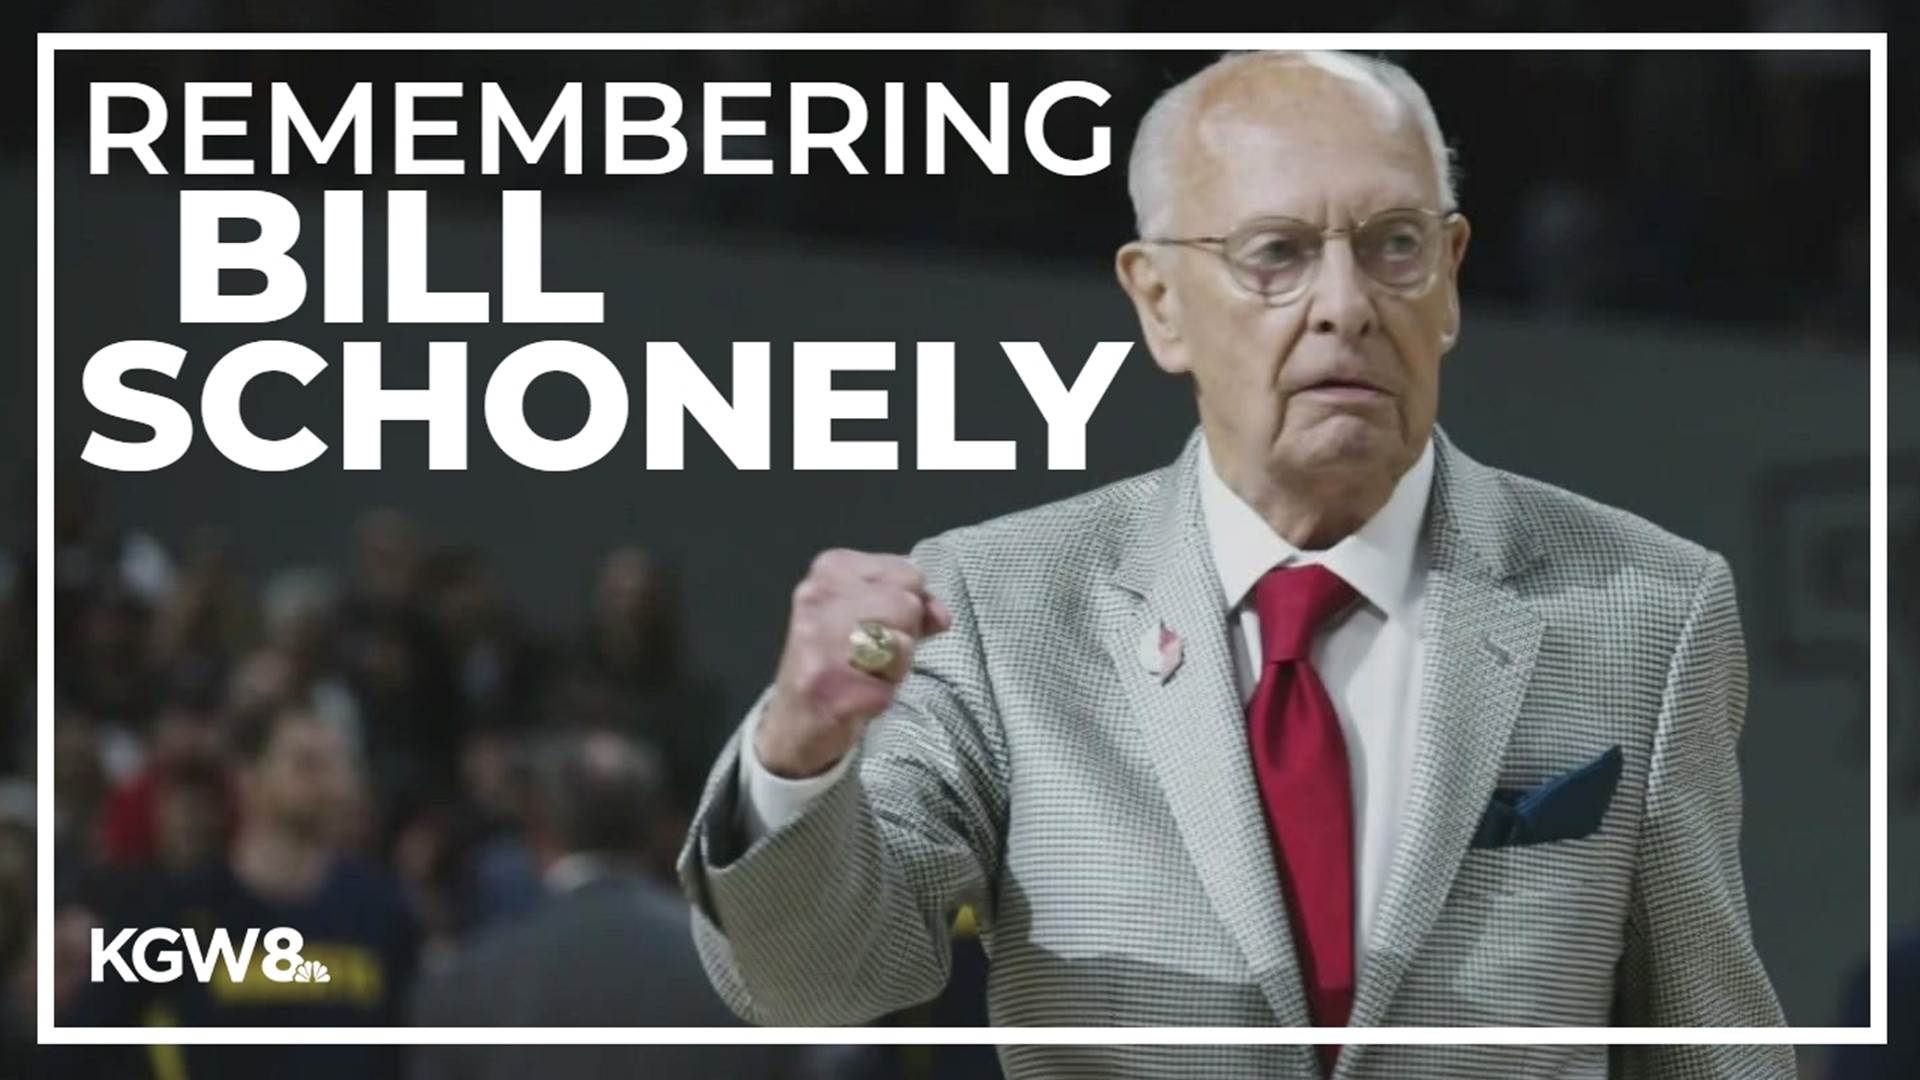 Schonely was the play-by-play announced for the Portland Trail Blazers for nearly 30 years, and coined the signature Rip City name.